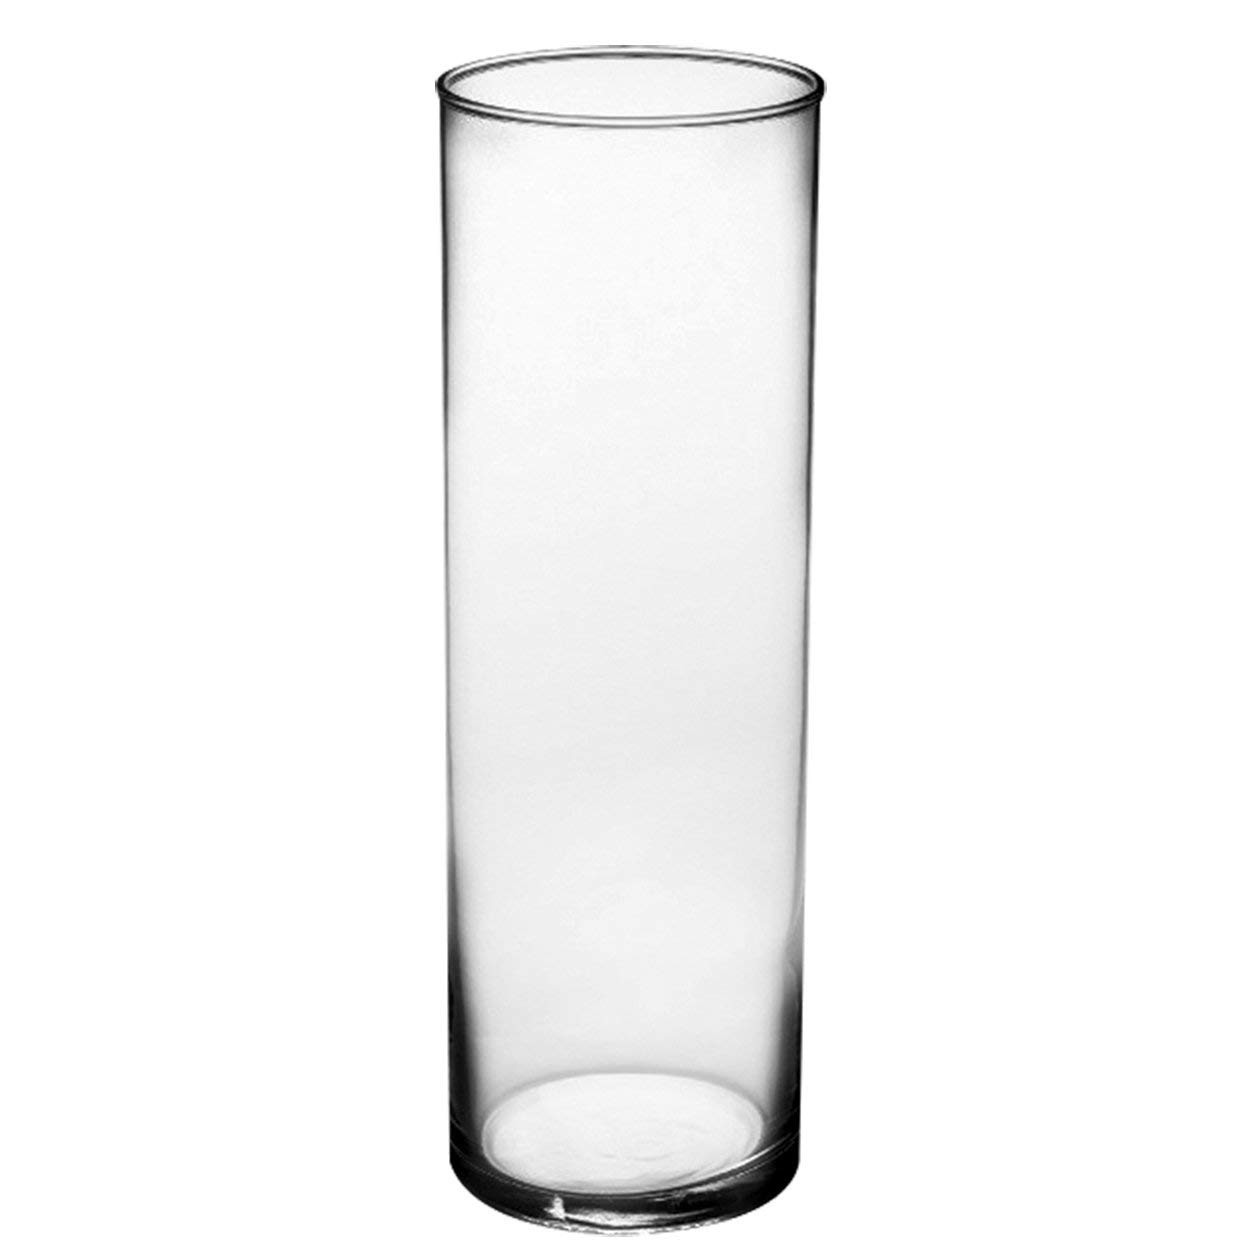 Tall Clear Glass Pedestal Vase Of Amazon Com Syndicate Sales 3 1 2 X 10 1 2 Cylinder Vase Clear Pertaining to Amazon Com Syndicate Sales 3 1 2 X 10 1 2 Cylinder Vase Clear Planters Garden Outdoor